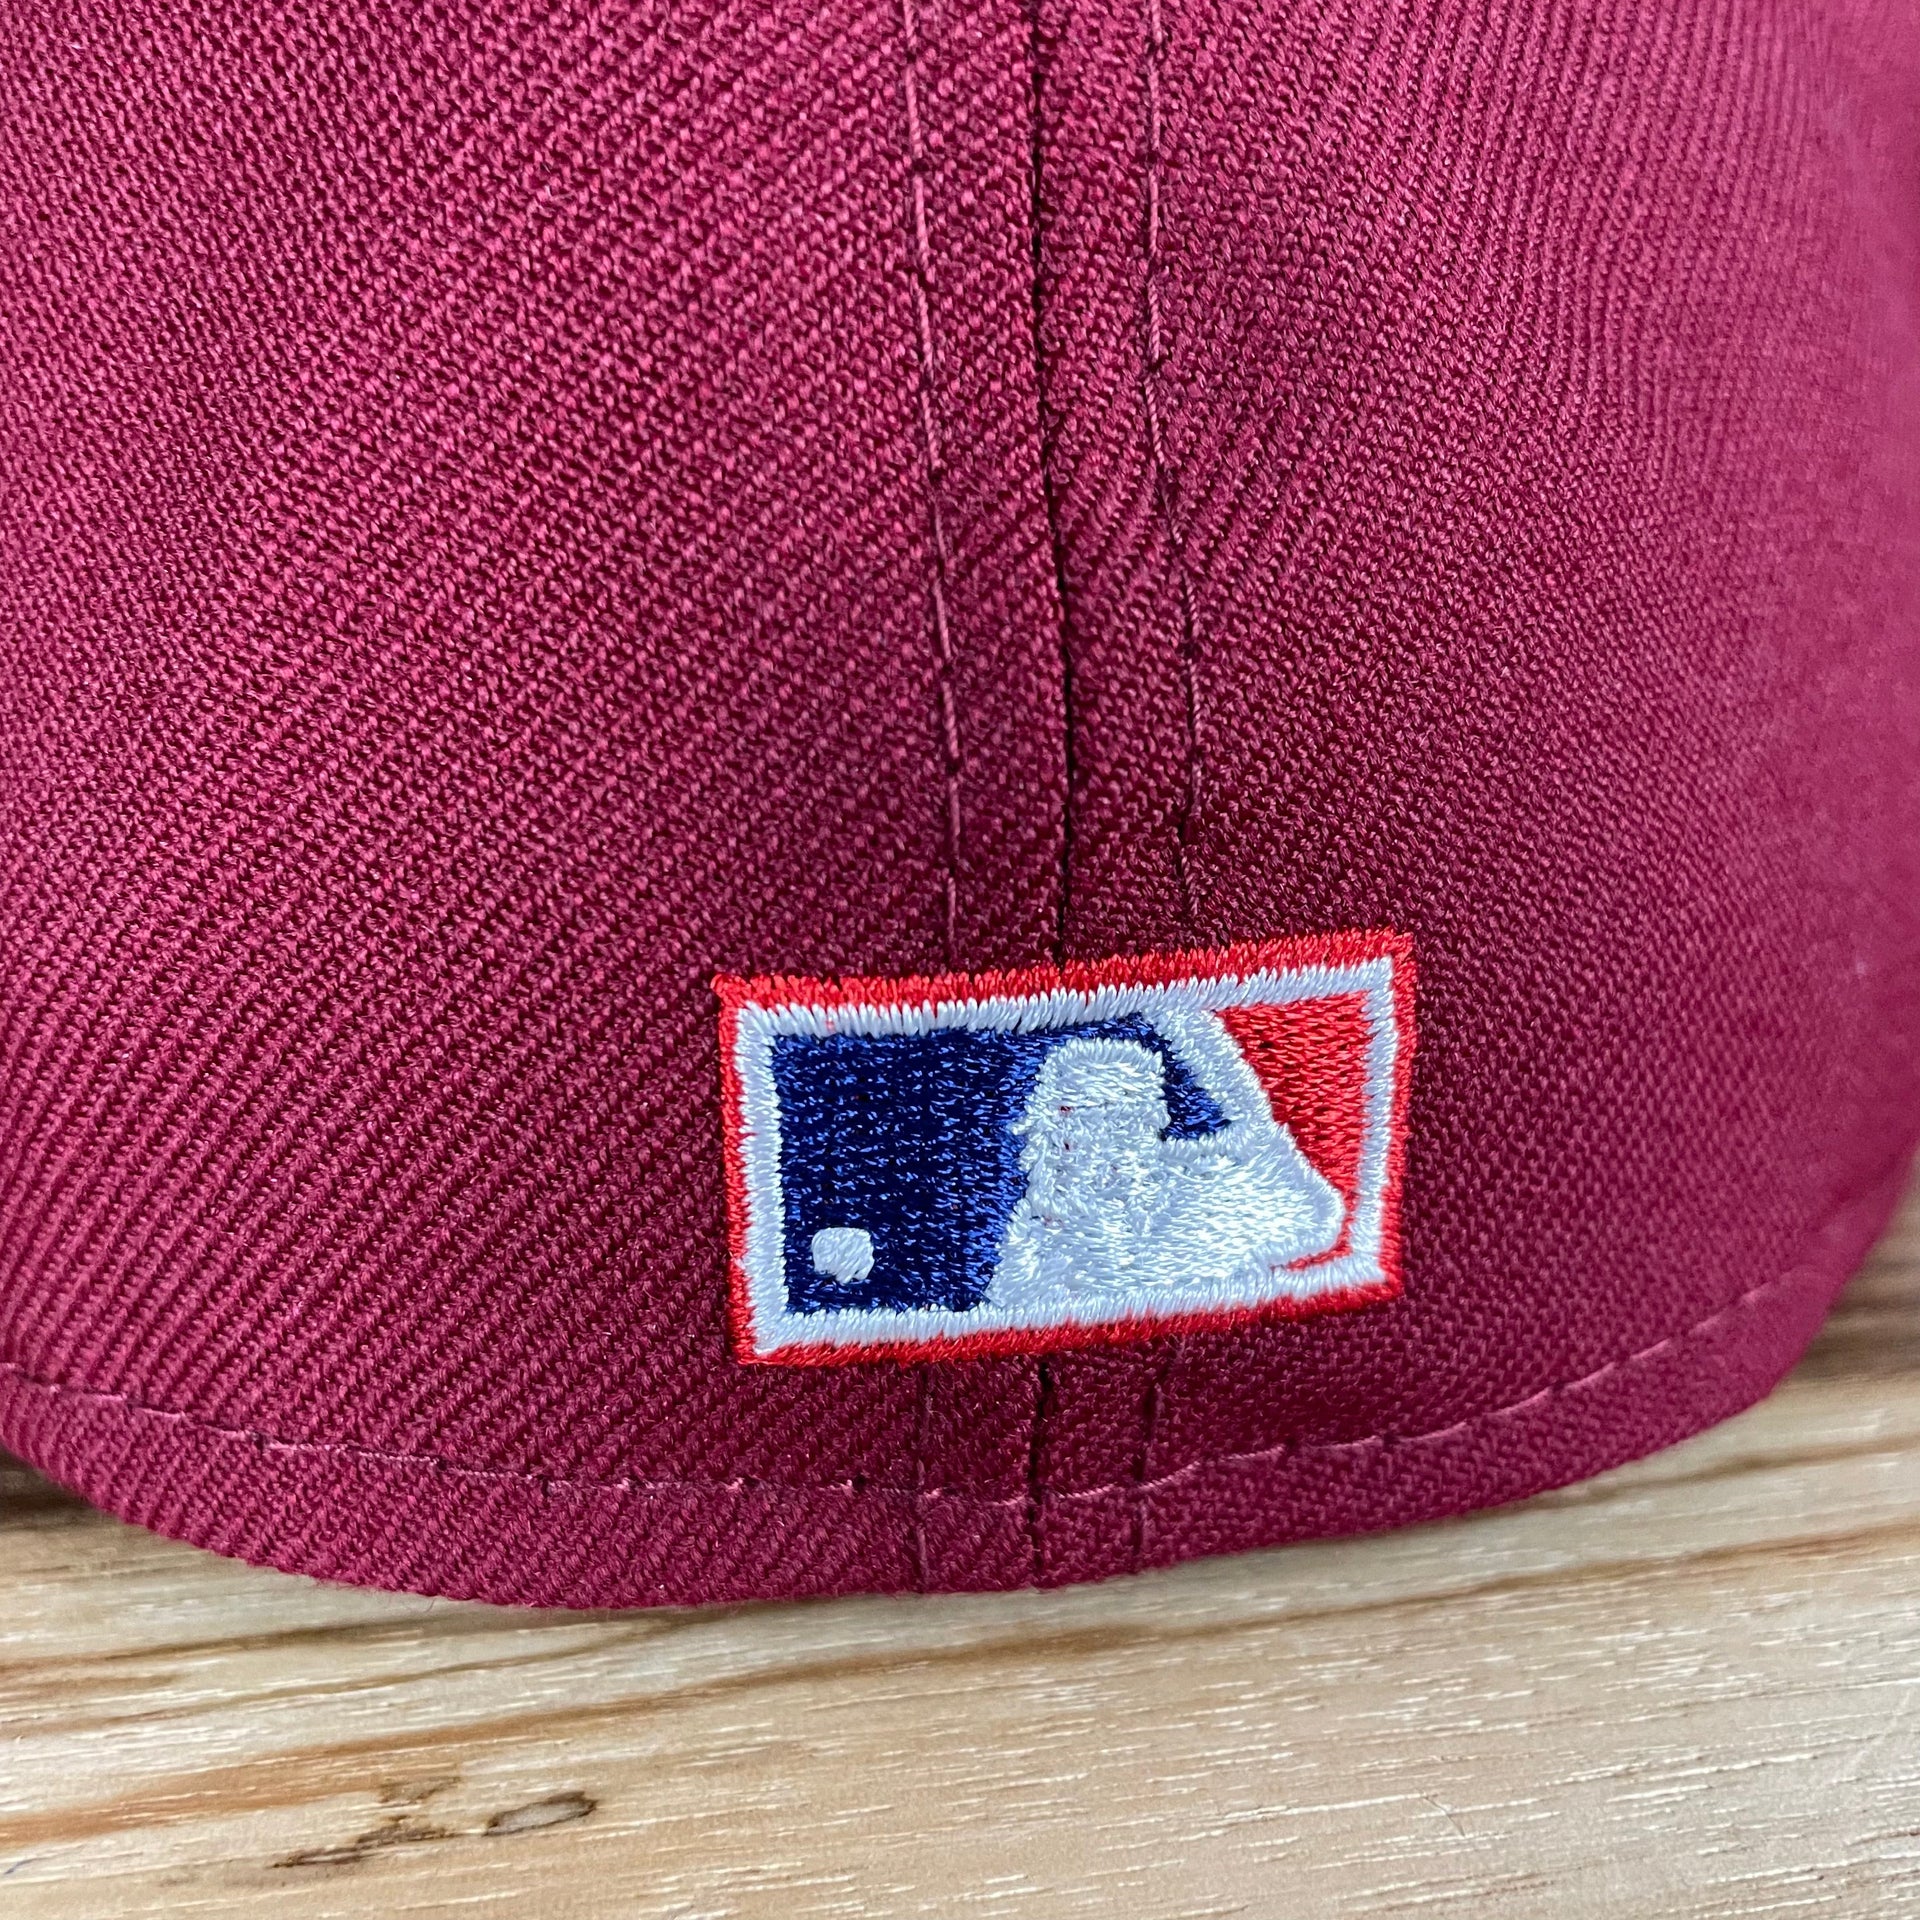 A close up of the Cooperstown MLB Batterman on the Philadelphia Phillies Cooperstown 5950 Day Side Patch Green Bottom 59Fifty Fitted Cap